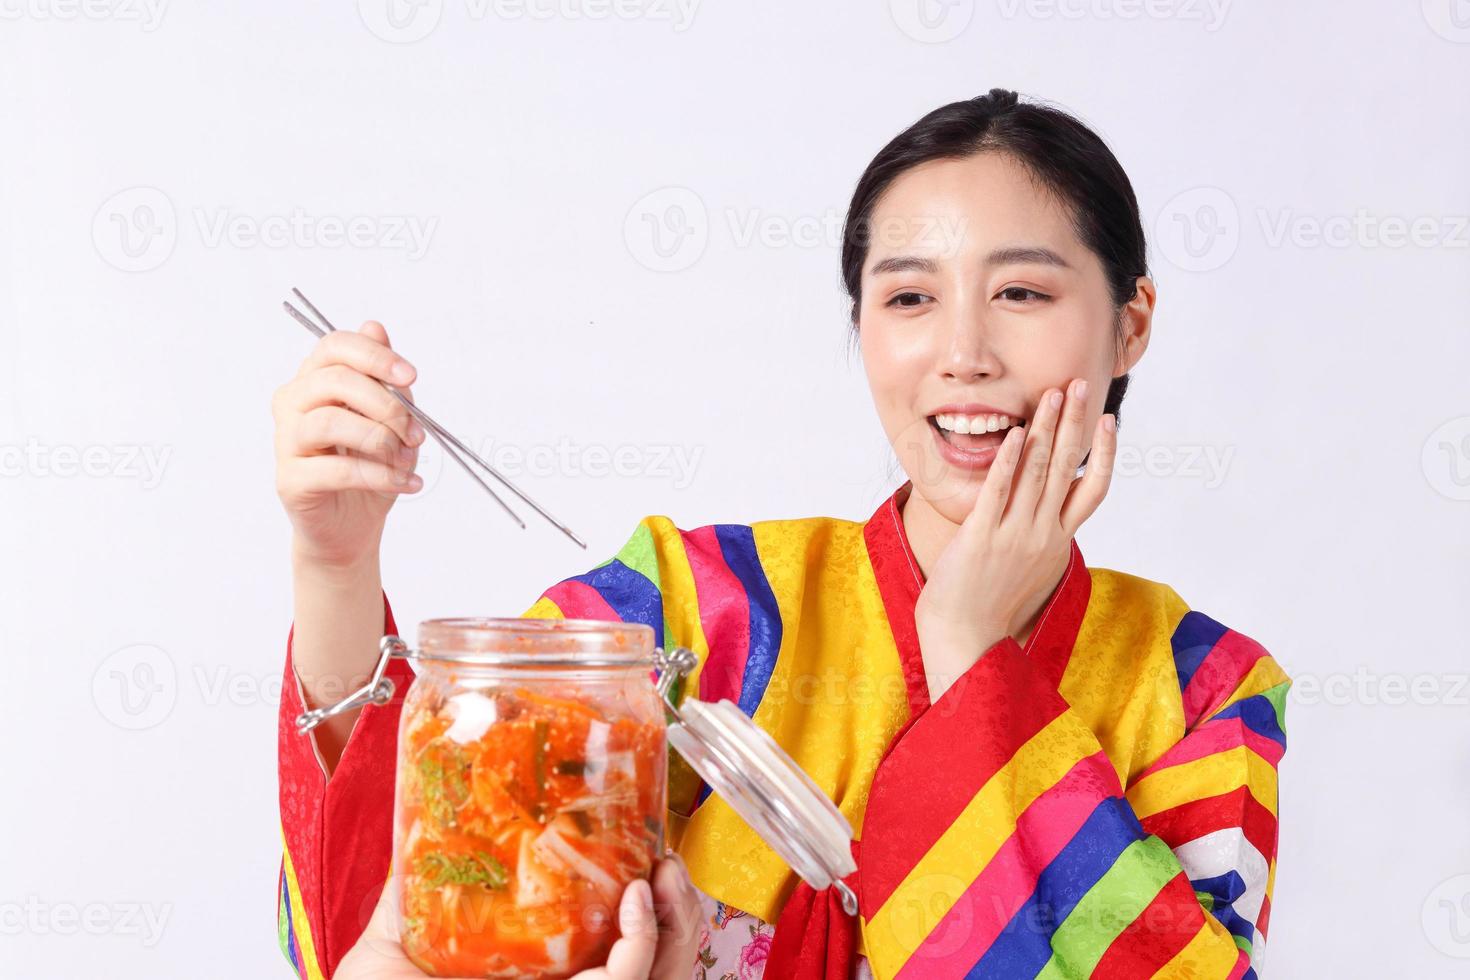 Beautiful korean woman wearing hanbok holding chopsticks Pick up kimchi in a glass jar Ingredients include white cabbage, carrot, radish, ginger, apple, chili and salt. Fermented food concept, Korean photo